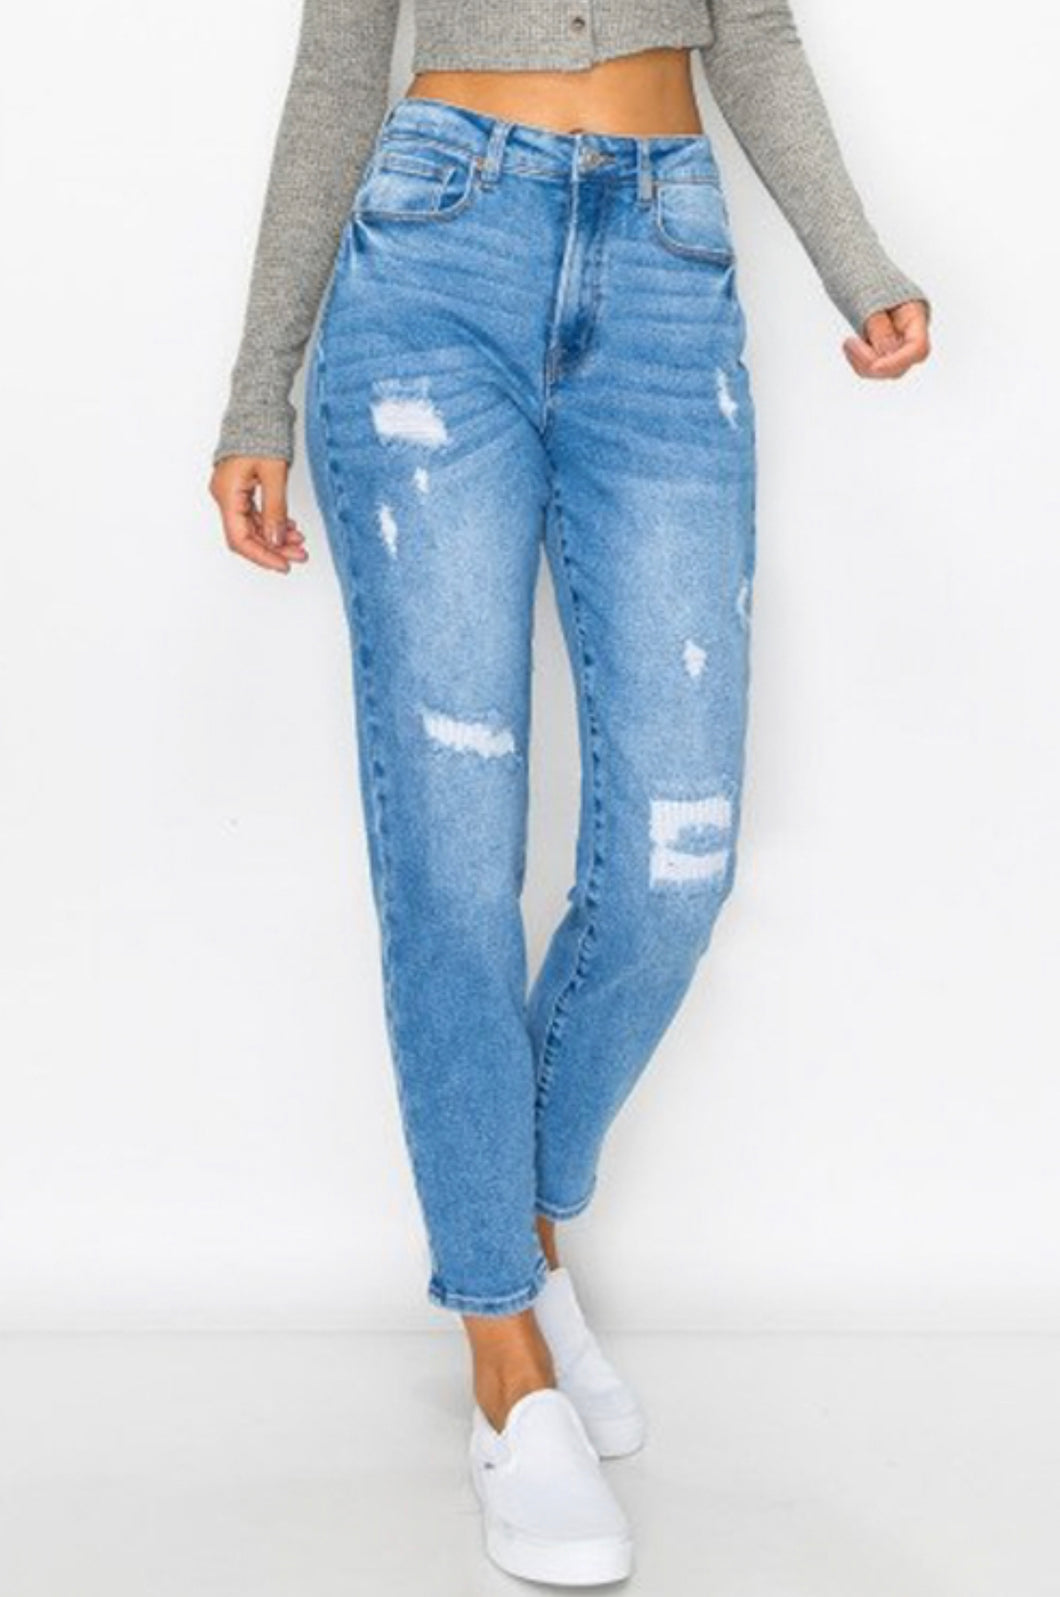 The Distressed Mom Jean